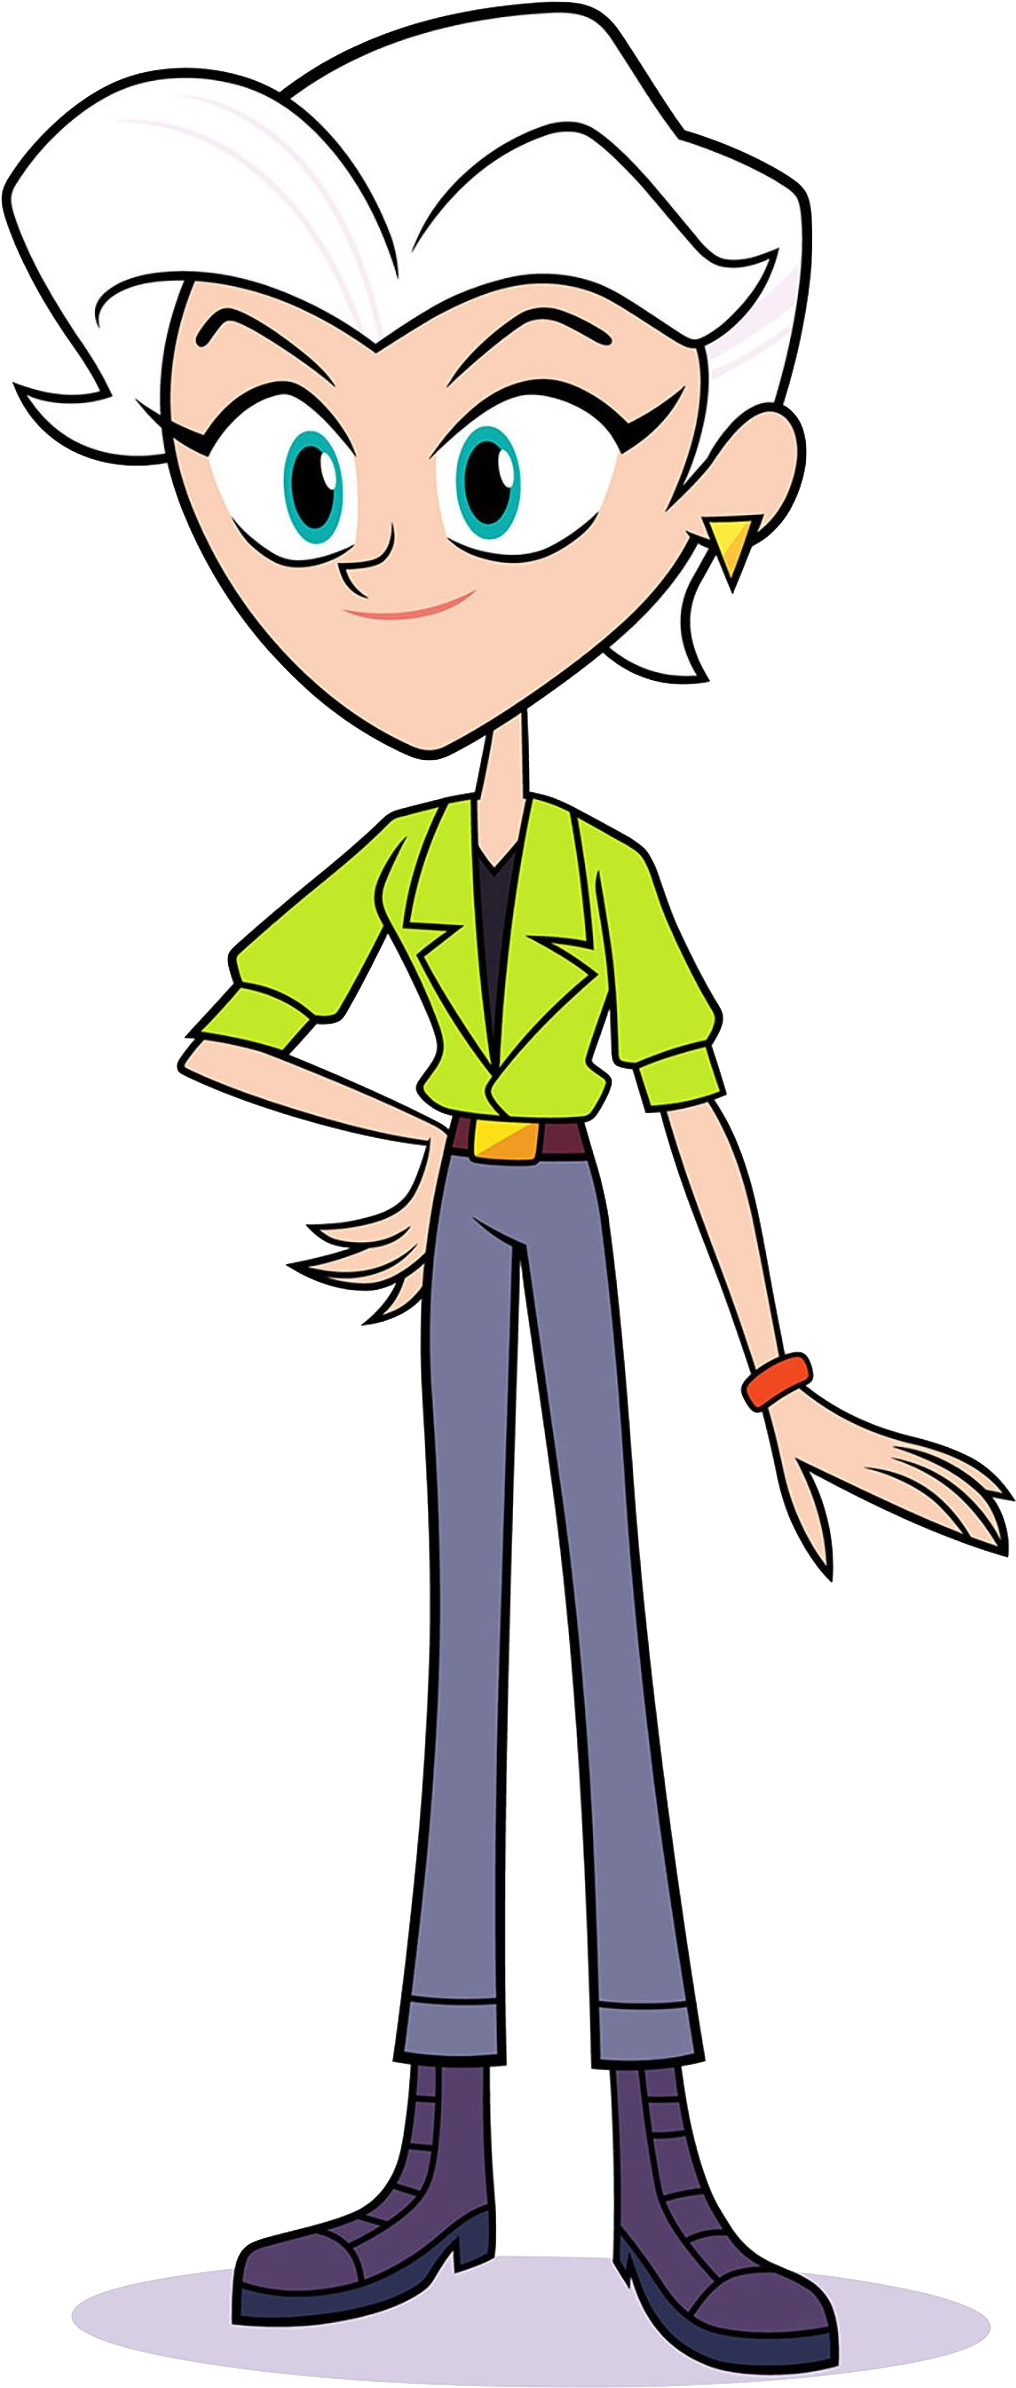 Cartoon Character With Hands On Hips